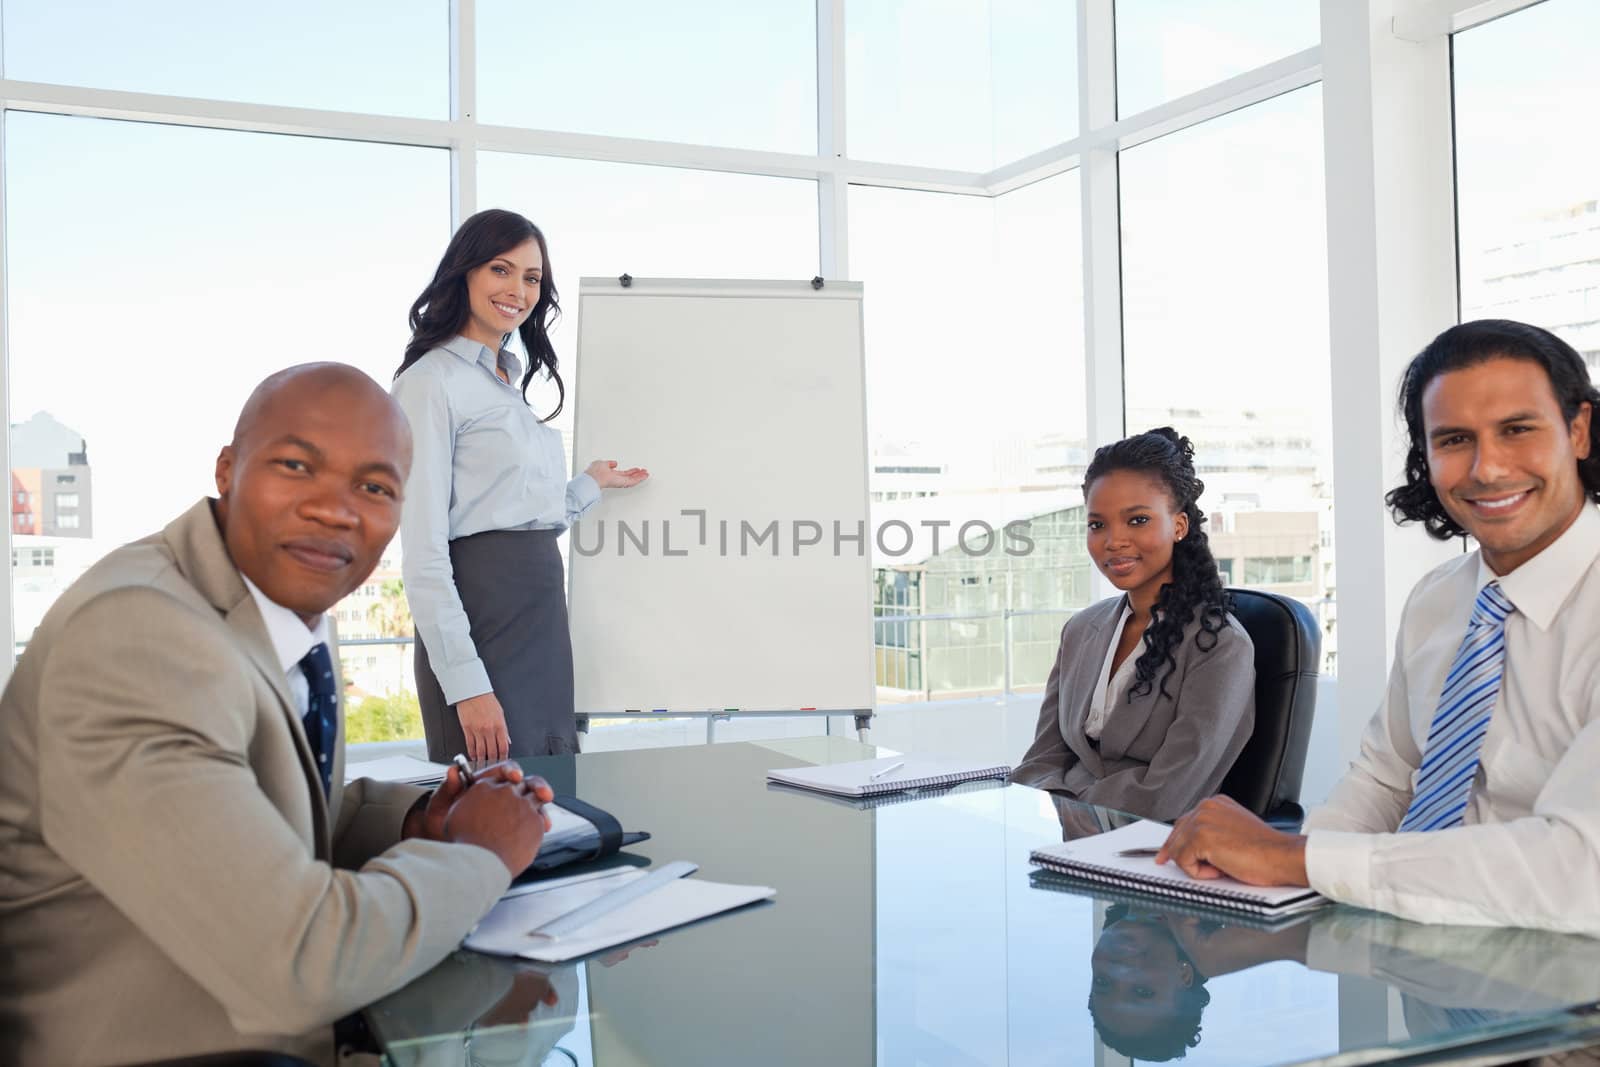 Smiling executive woman giving a presentation to her relaxed coworkers